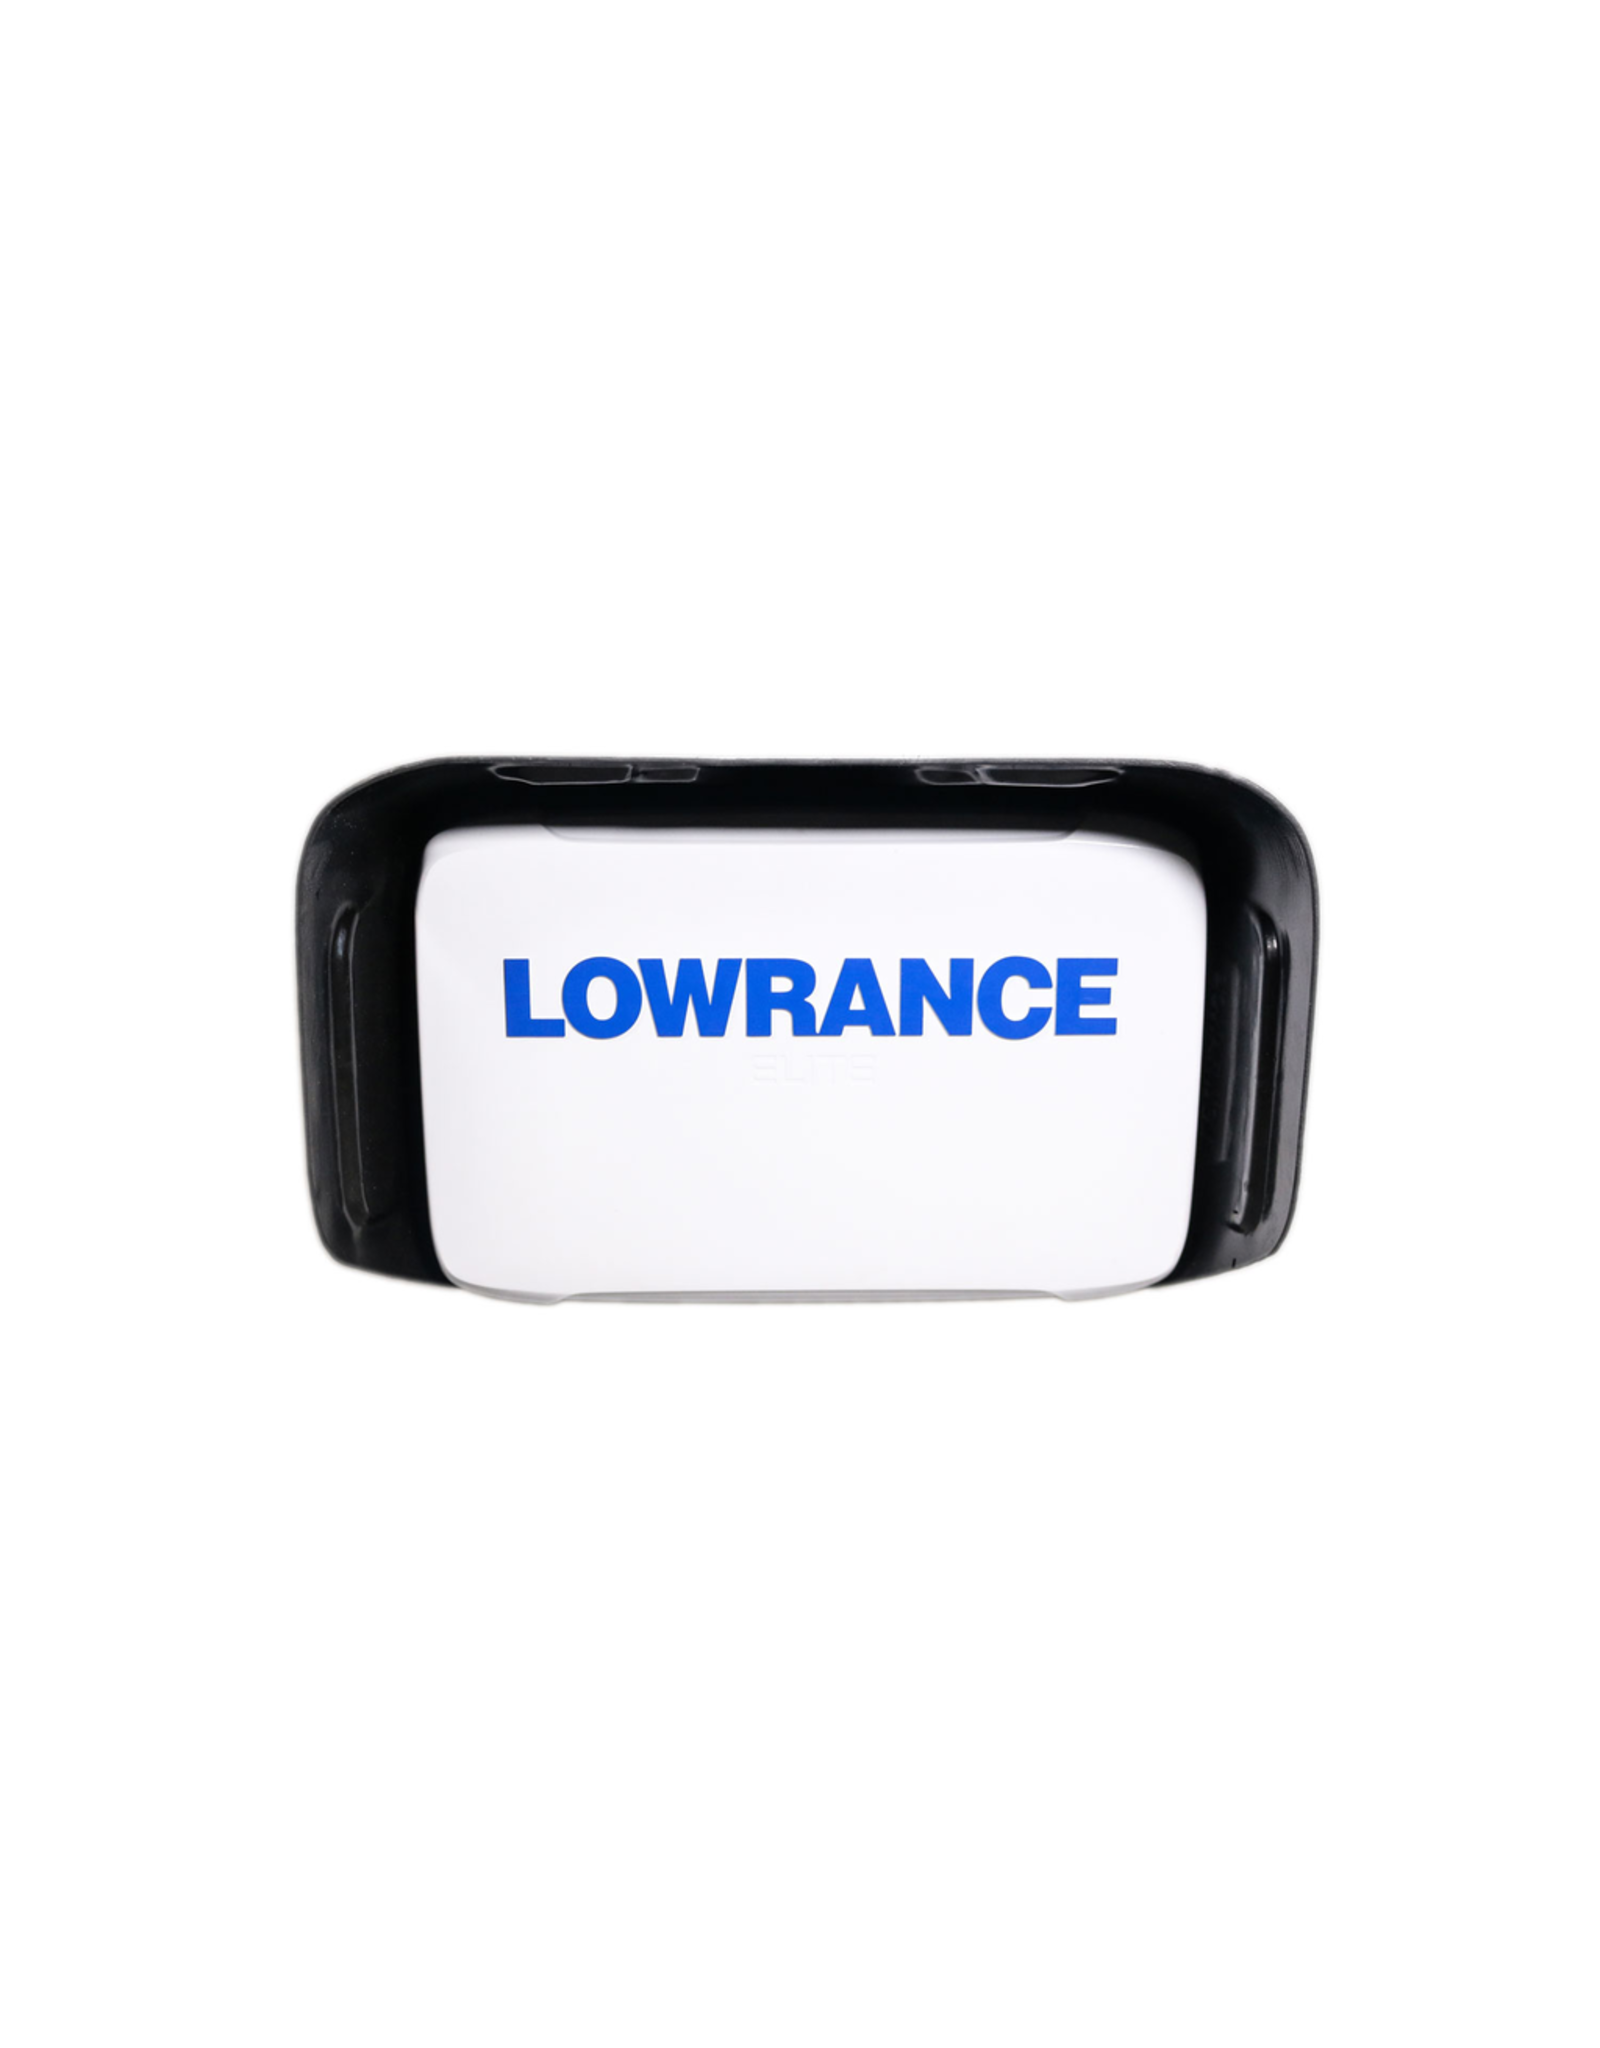 LOWRANCE Protective Suncover for Elite/HOOK 7 in. Displays